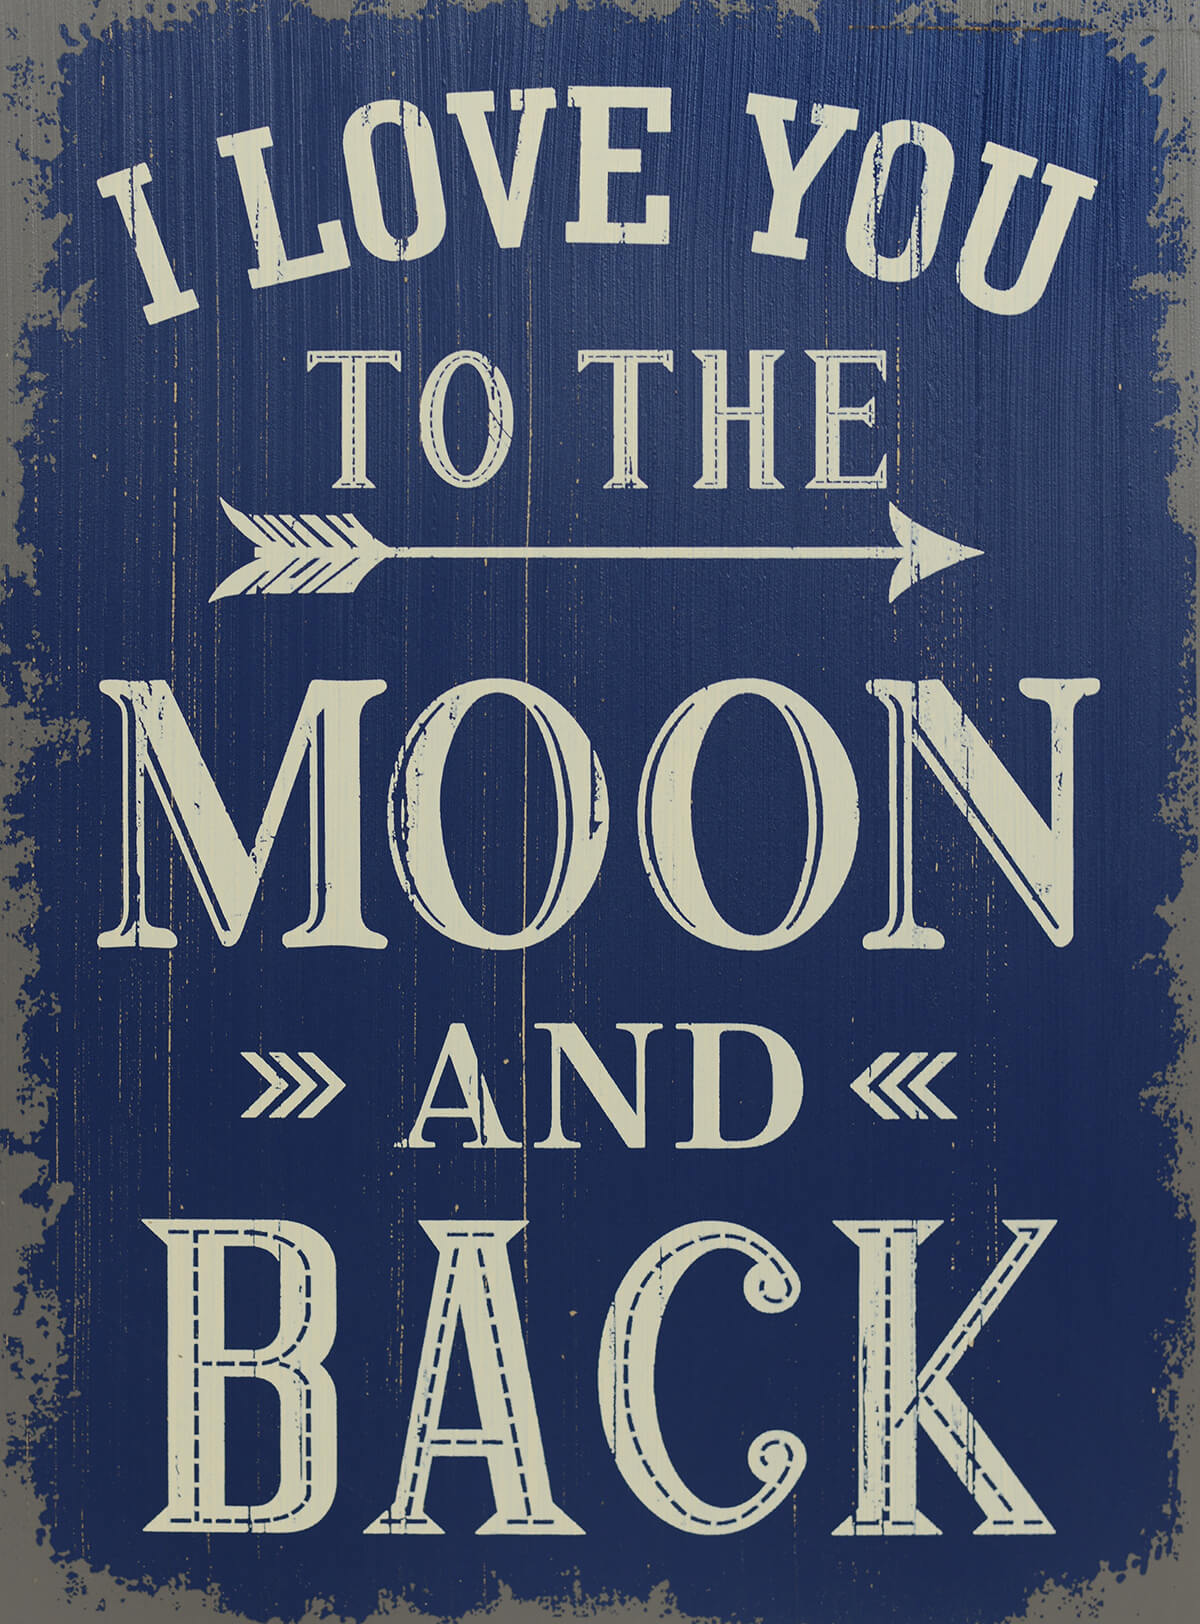 i-love-you-to-the-moon-and-back-19-sign-saveoncrafts